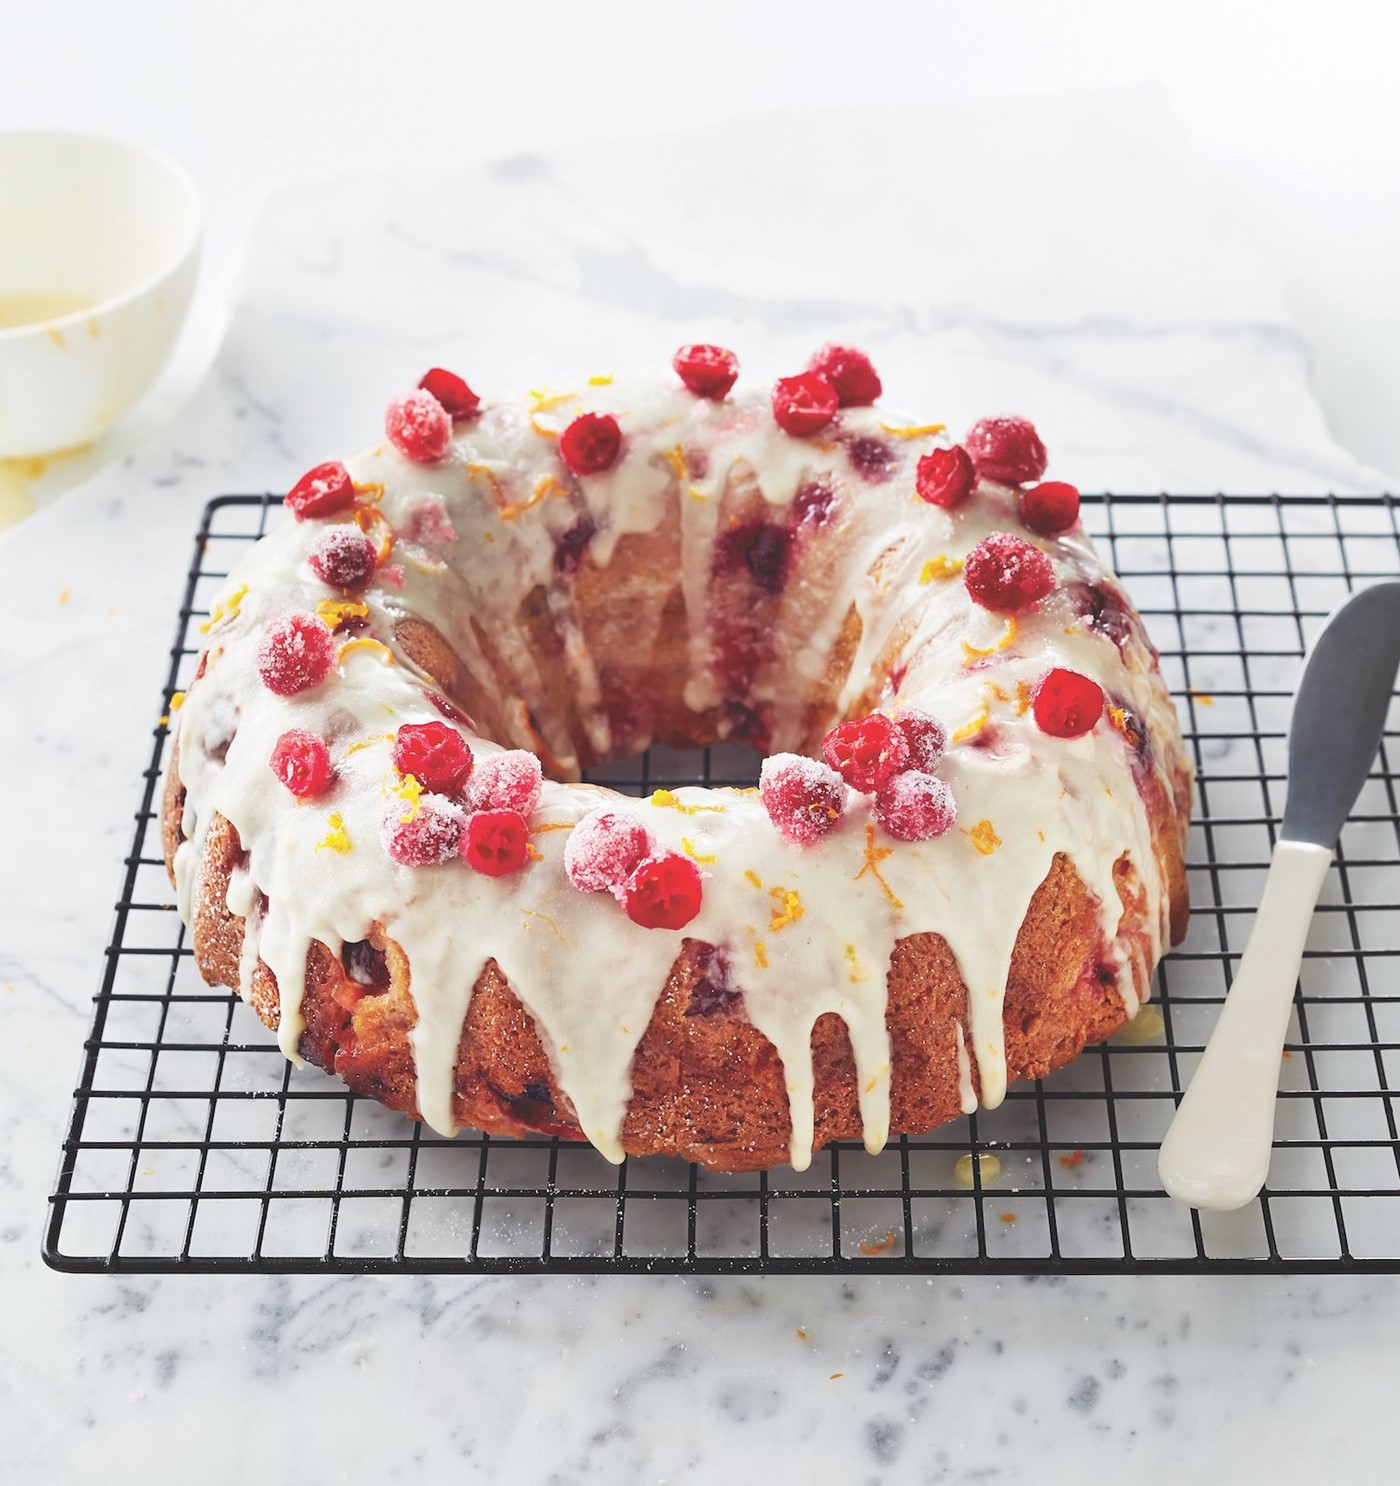 Bunt Fruit Cake Topped with Icing, Sugared Cranberries and Orange Zest